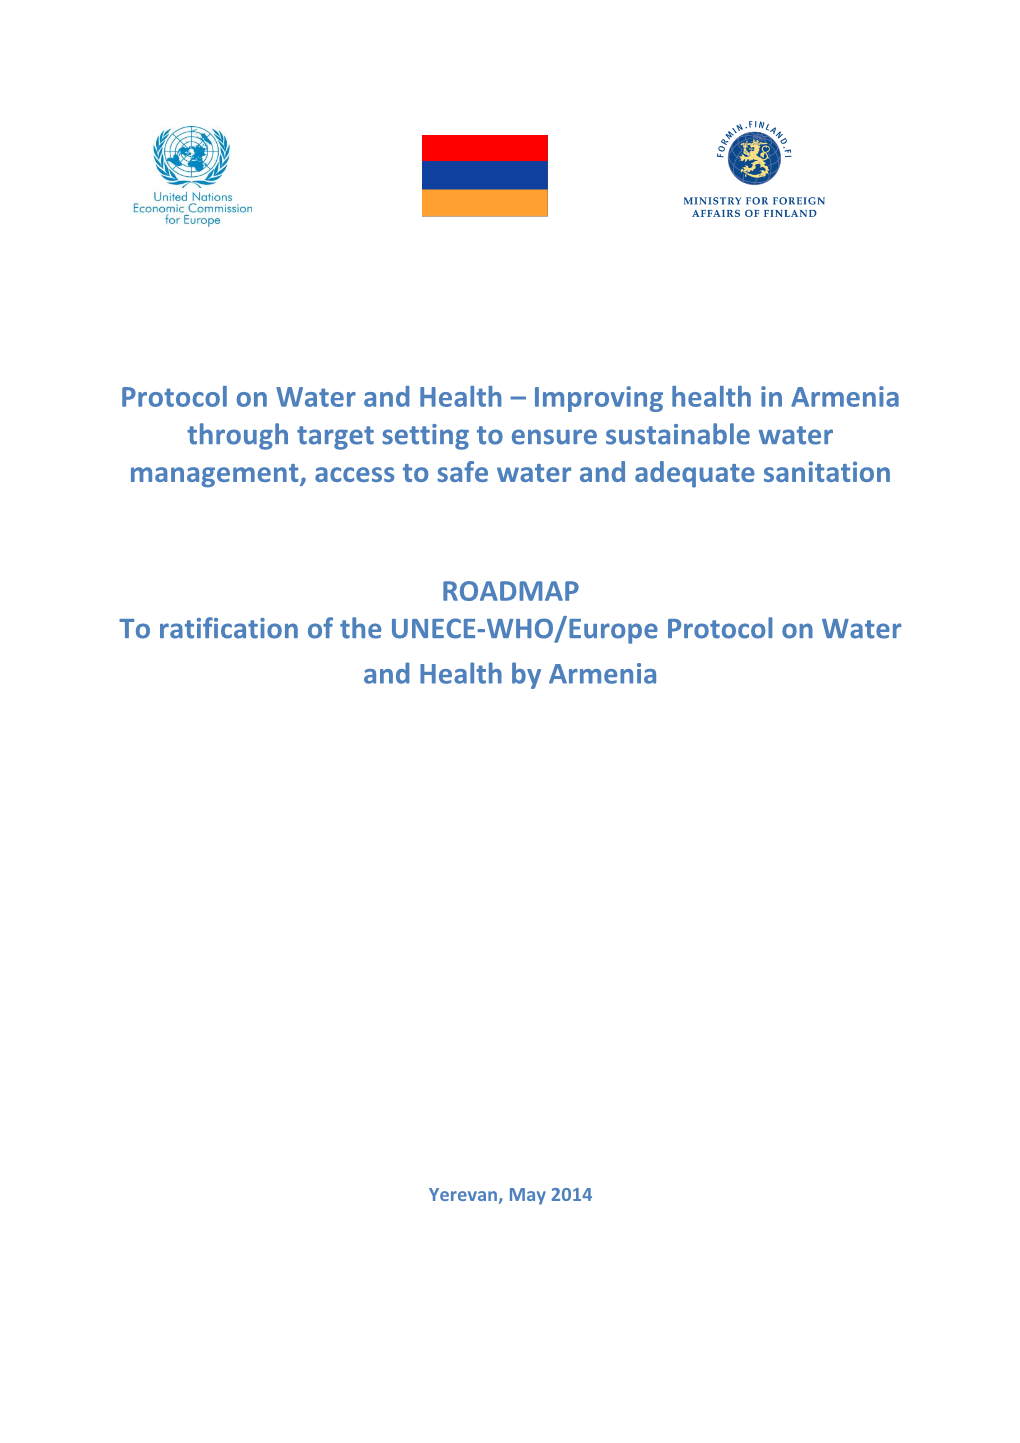 Protocol on Water and Health – Improving Health in Armenia